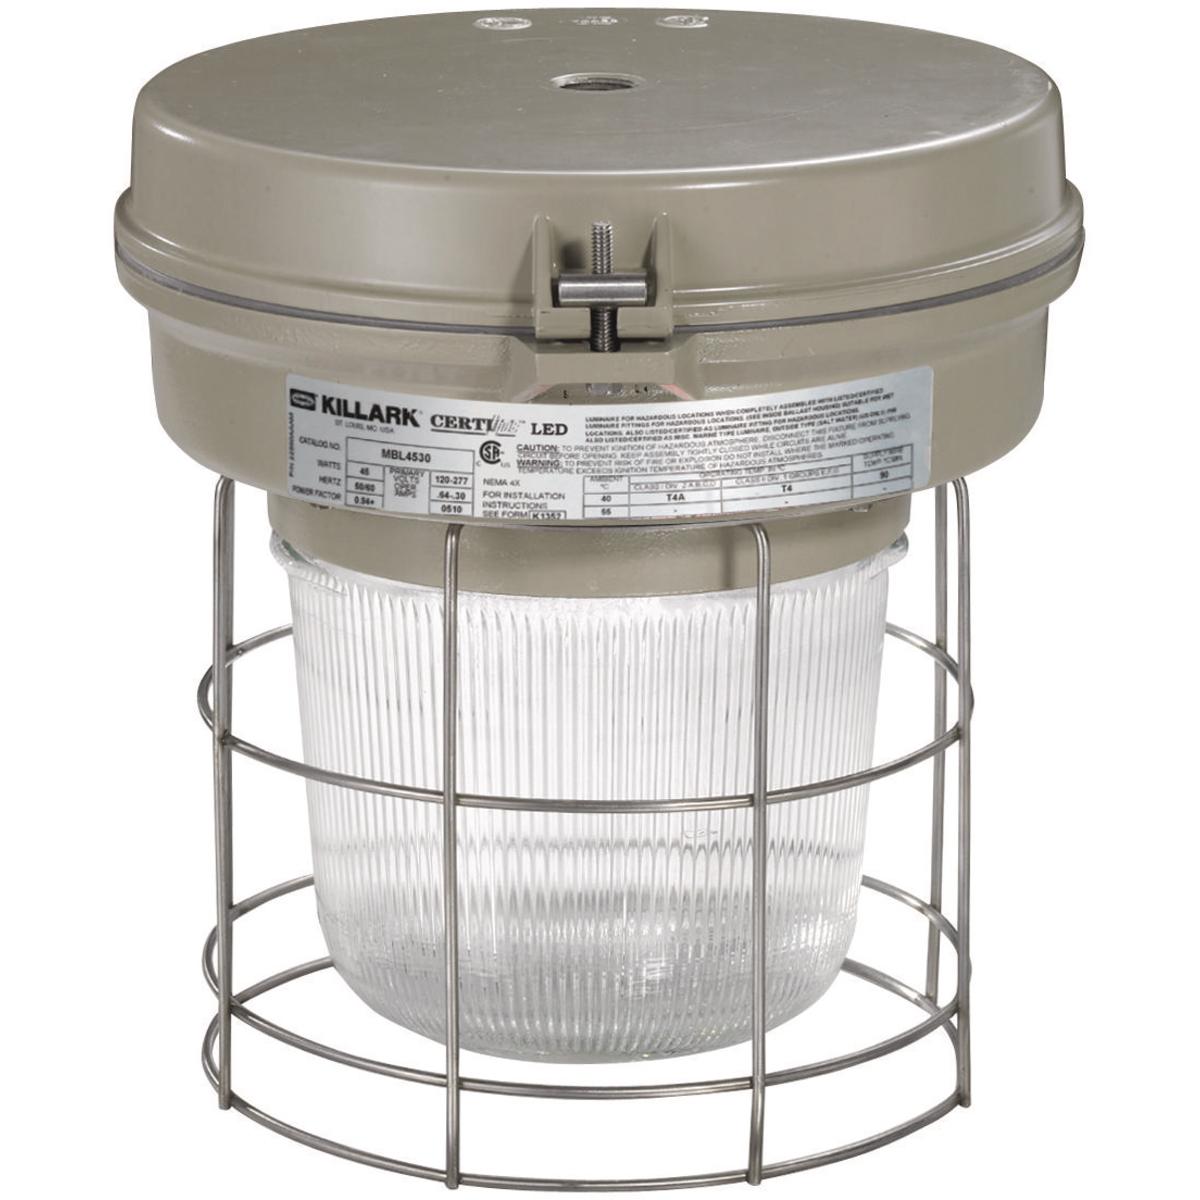 Hubbell VM3H100A2R1G VM3 Series - 100W Metal Halide Quadri-Volt - 3/4" Pendant - Type I Glass Refractor and Guard  ; Ballast tank and splice box – corrosion resistant copper-free aluminum alloy with baked powder epoxy/polyester finish, electrostatically applied for complete, 